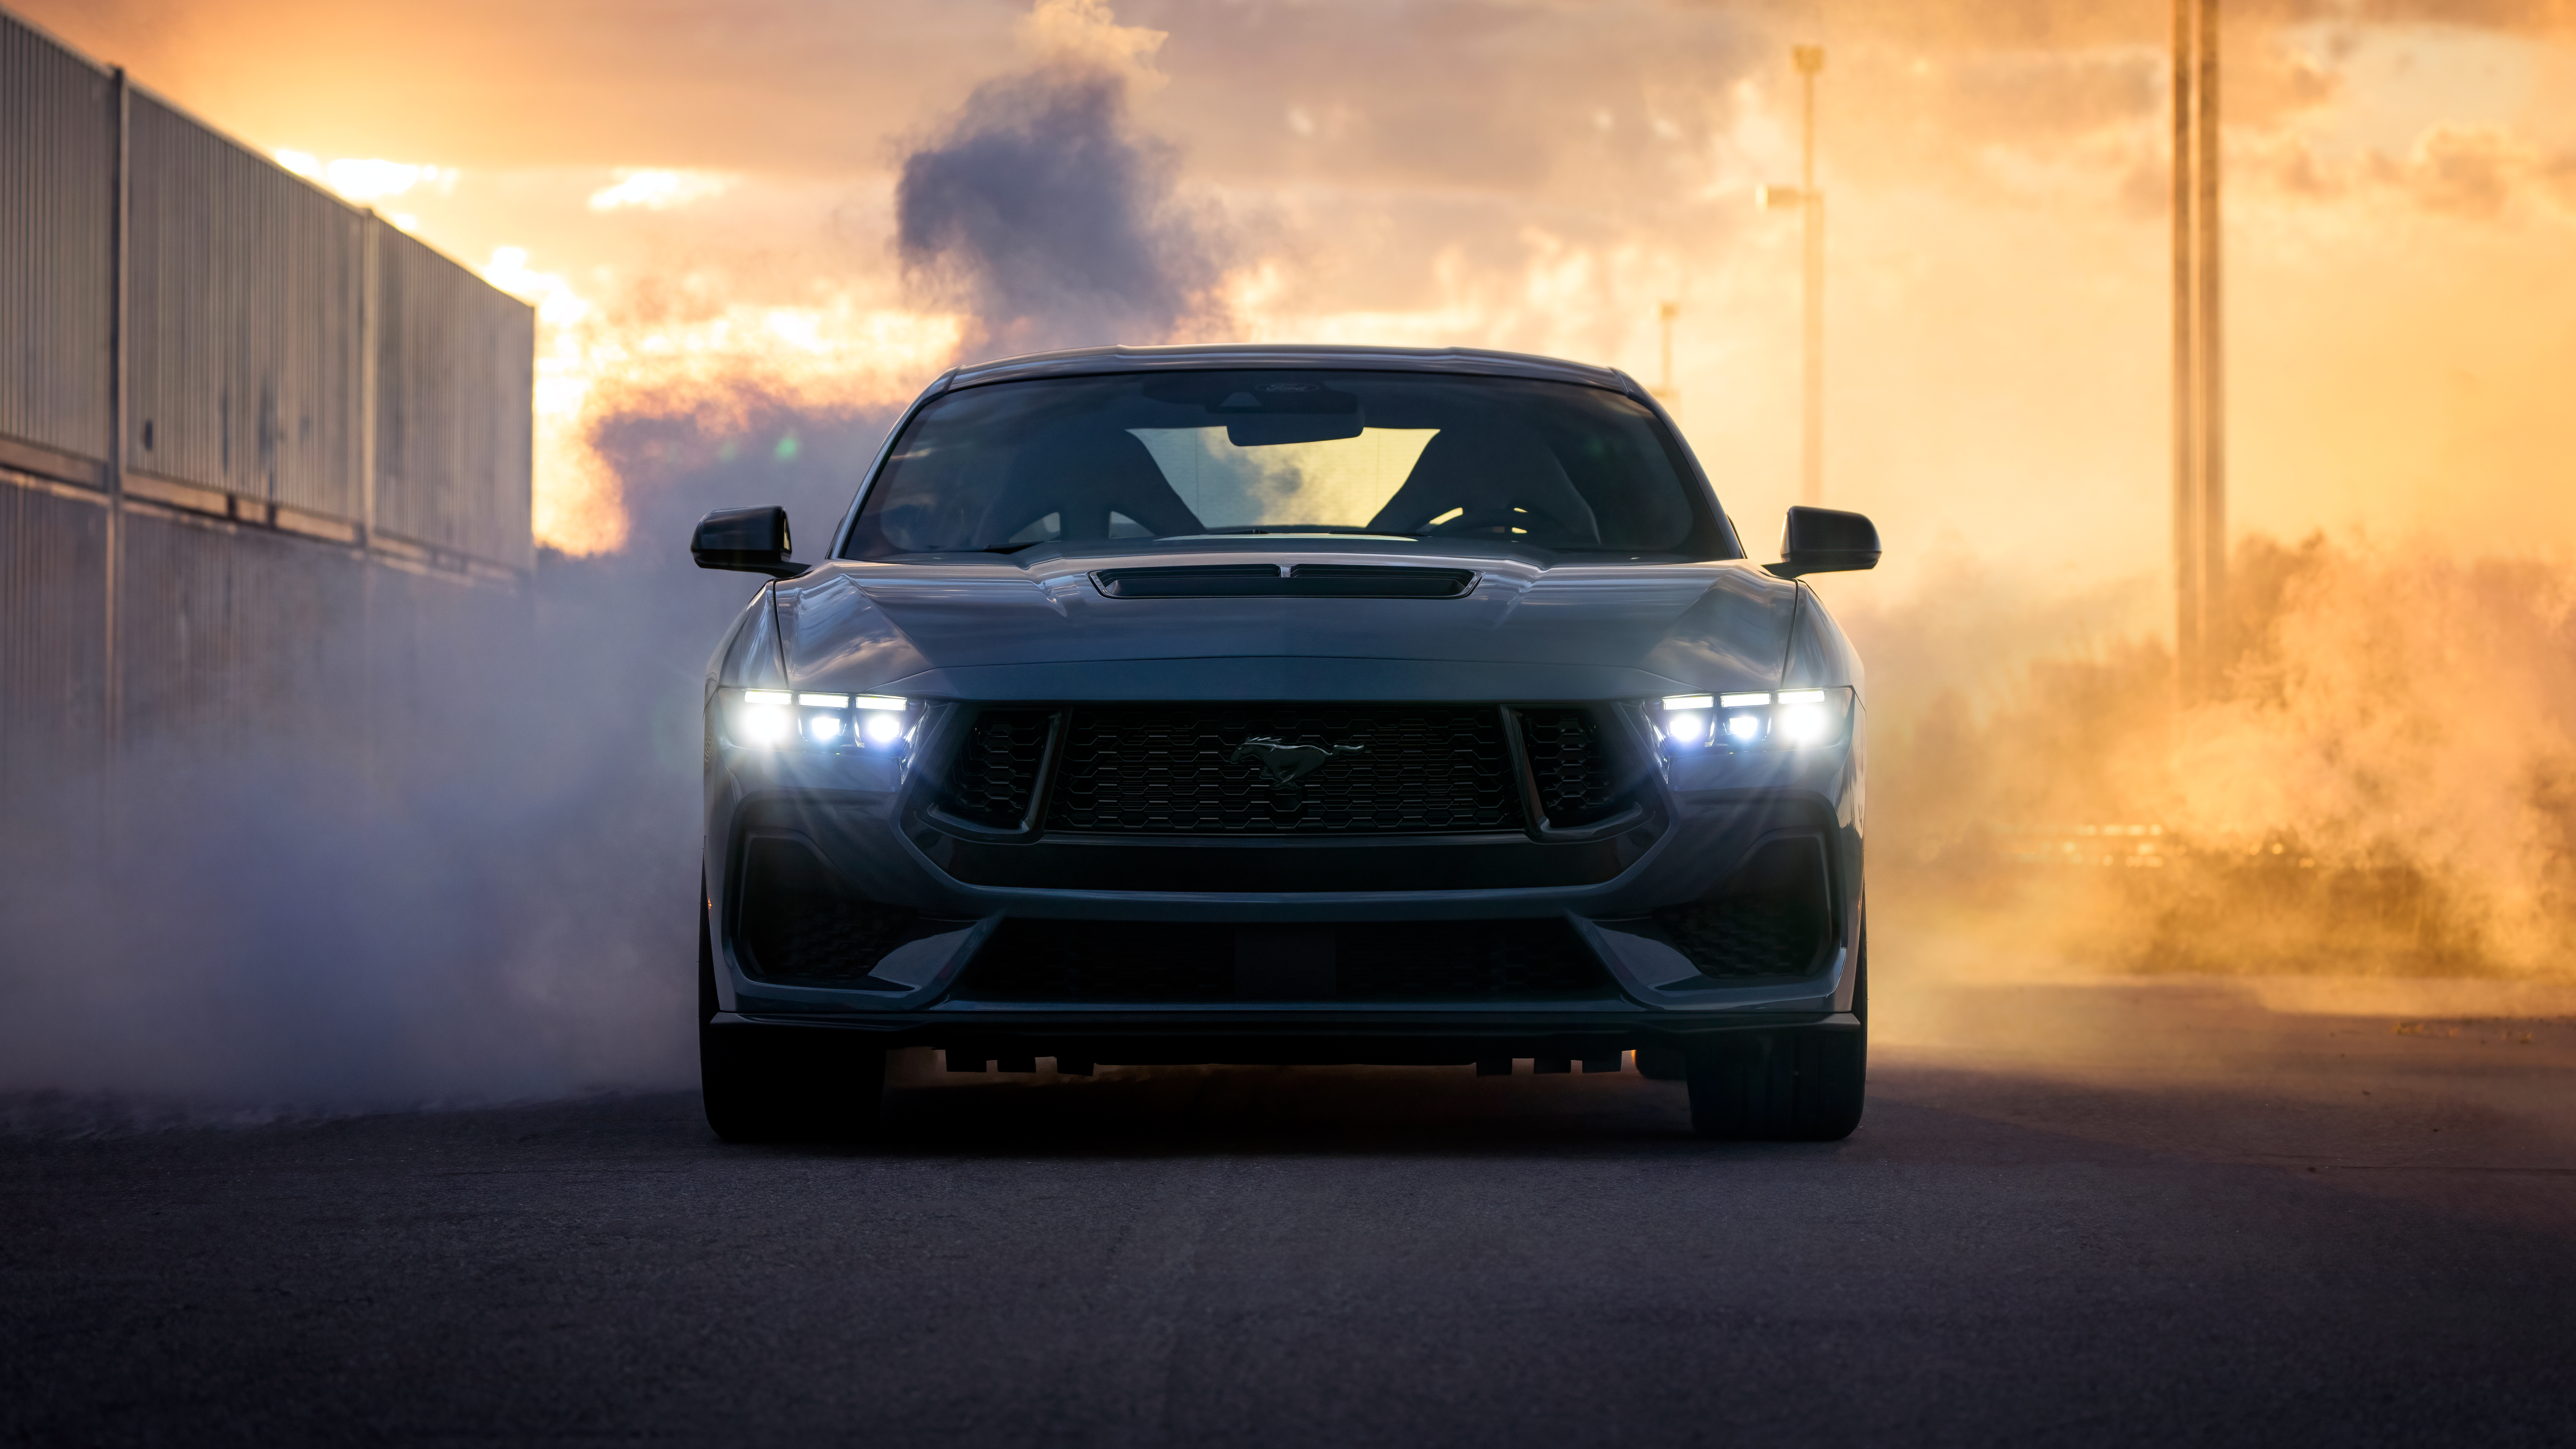 1680x1050 / 1680x1050 ford mustang wallpaper JPG 608 kB - Coolwallpapers.me!